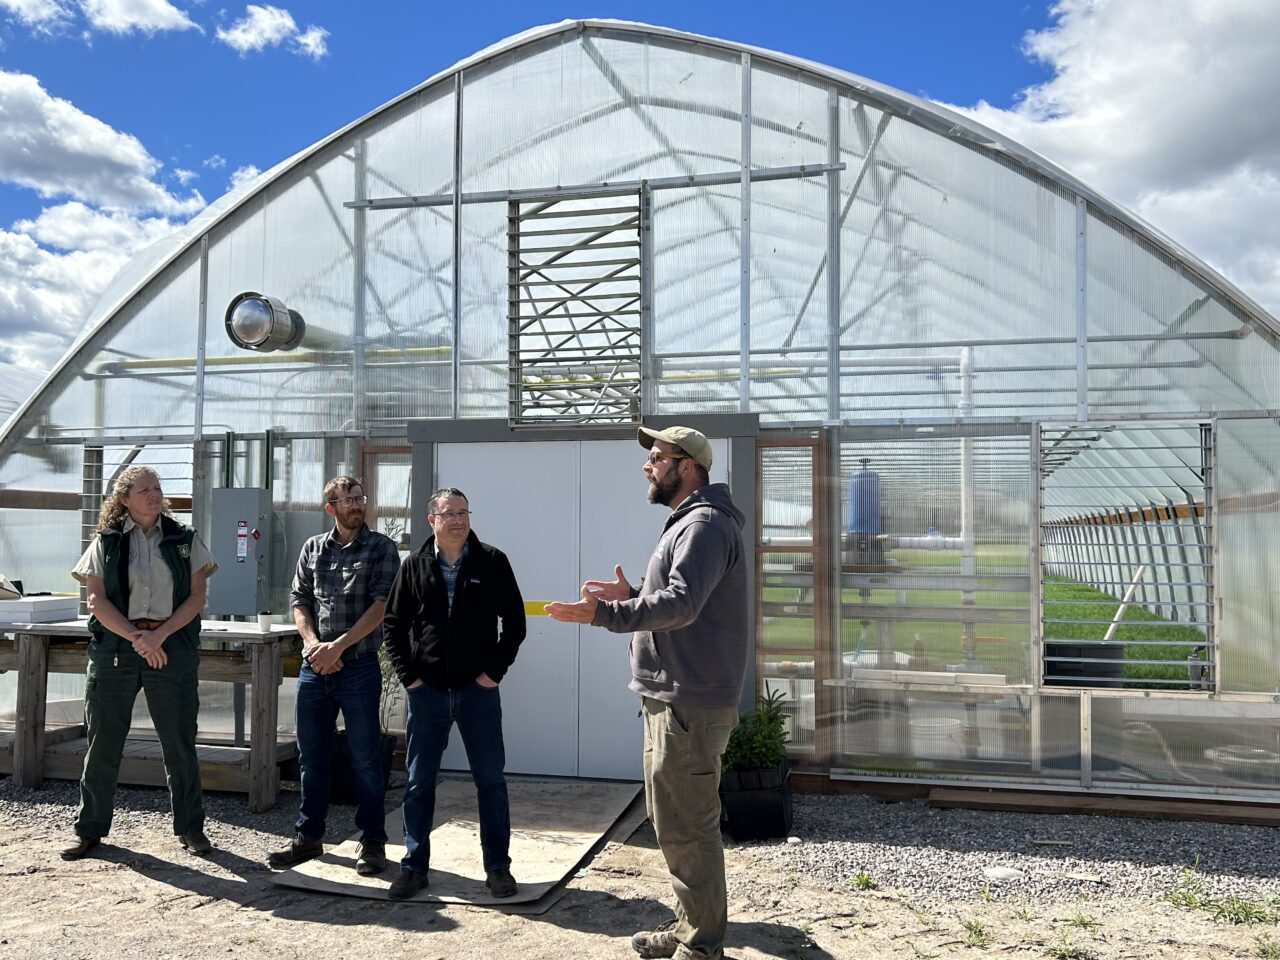 Michael Butts, Montana DNRC nursery manager, tours Matt Arno, Wes Swaffar, Jennifer Hensiek and others around the Anaconda greenhouse during the grand opening of the building.